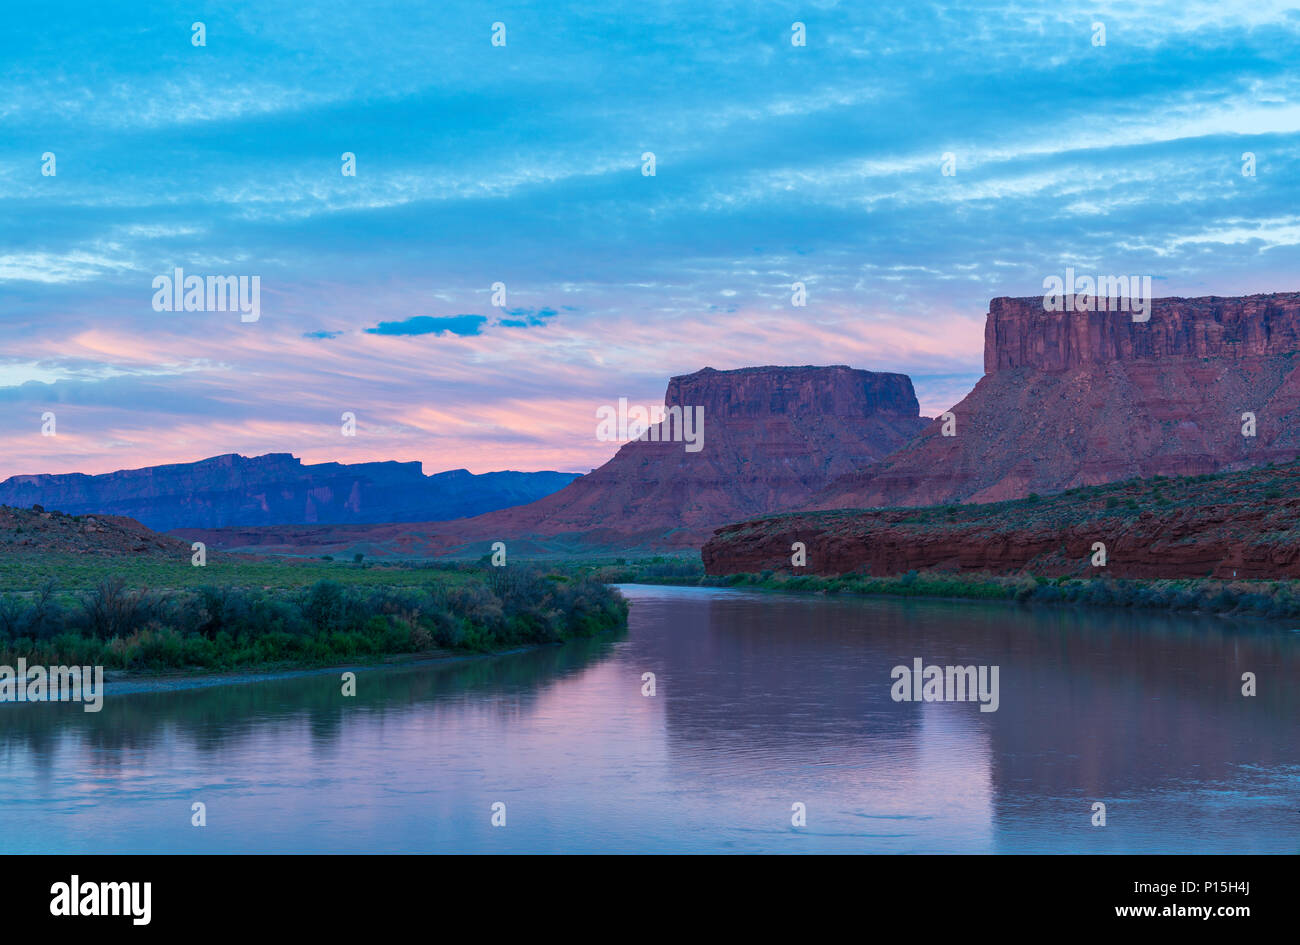 Pink sunset along Colorado River with two butte rock formations located near Moab and Arches National Park, Utah, USA. Stock Photo